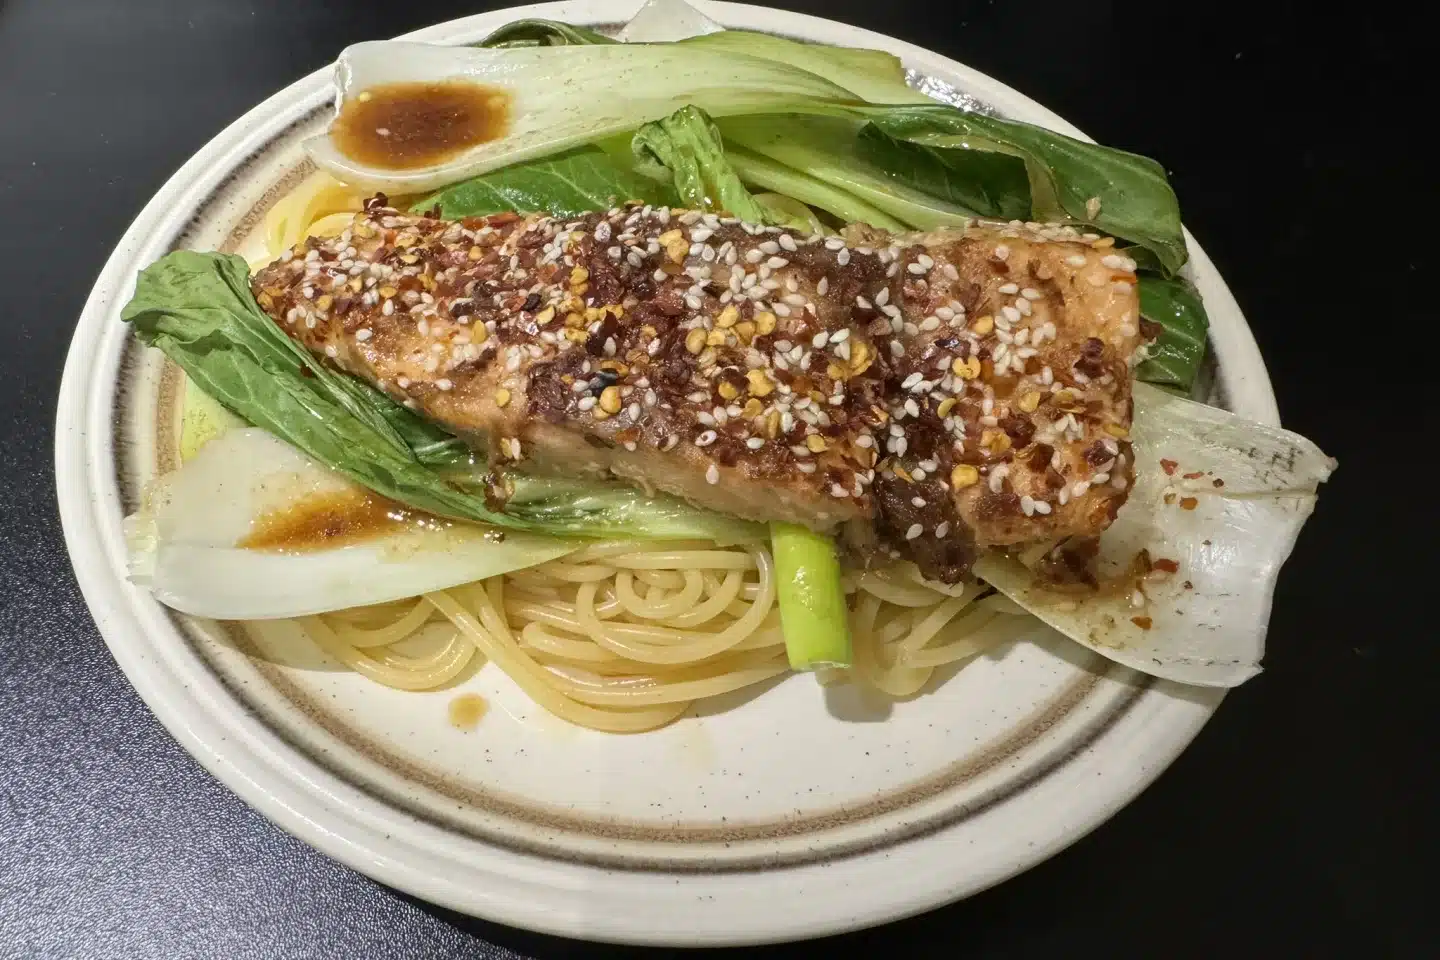 Bed of green leaved vegetables on spaghetti topped with cooked salmon with sprinkled sesame seeds on top